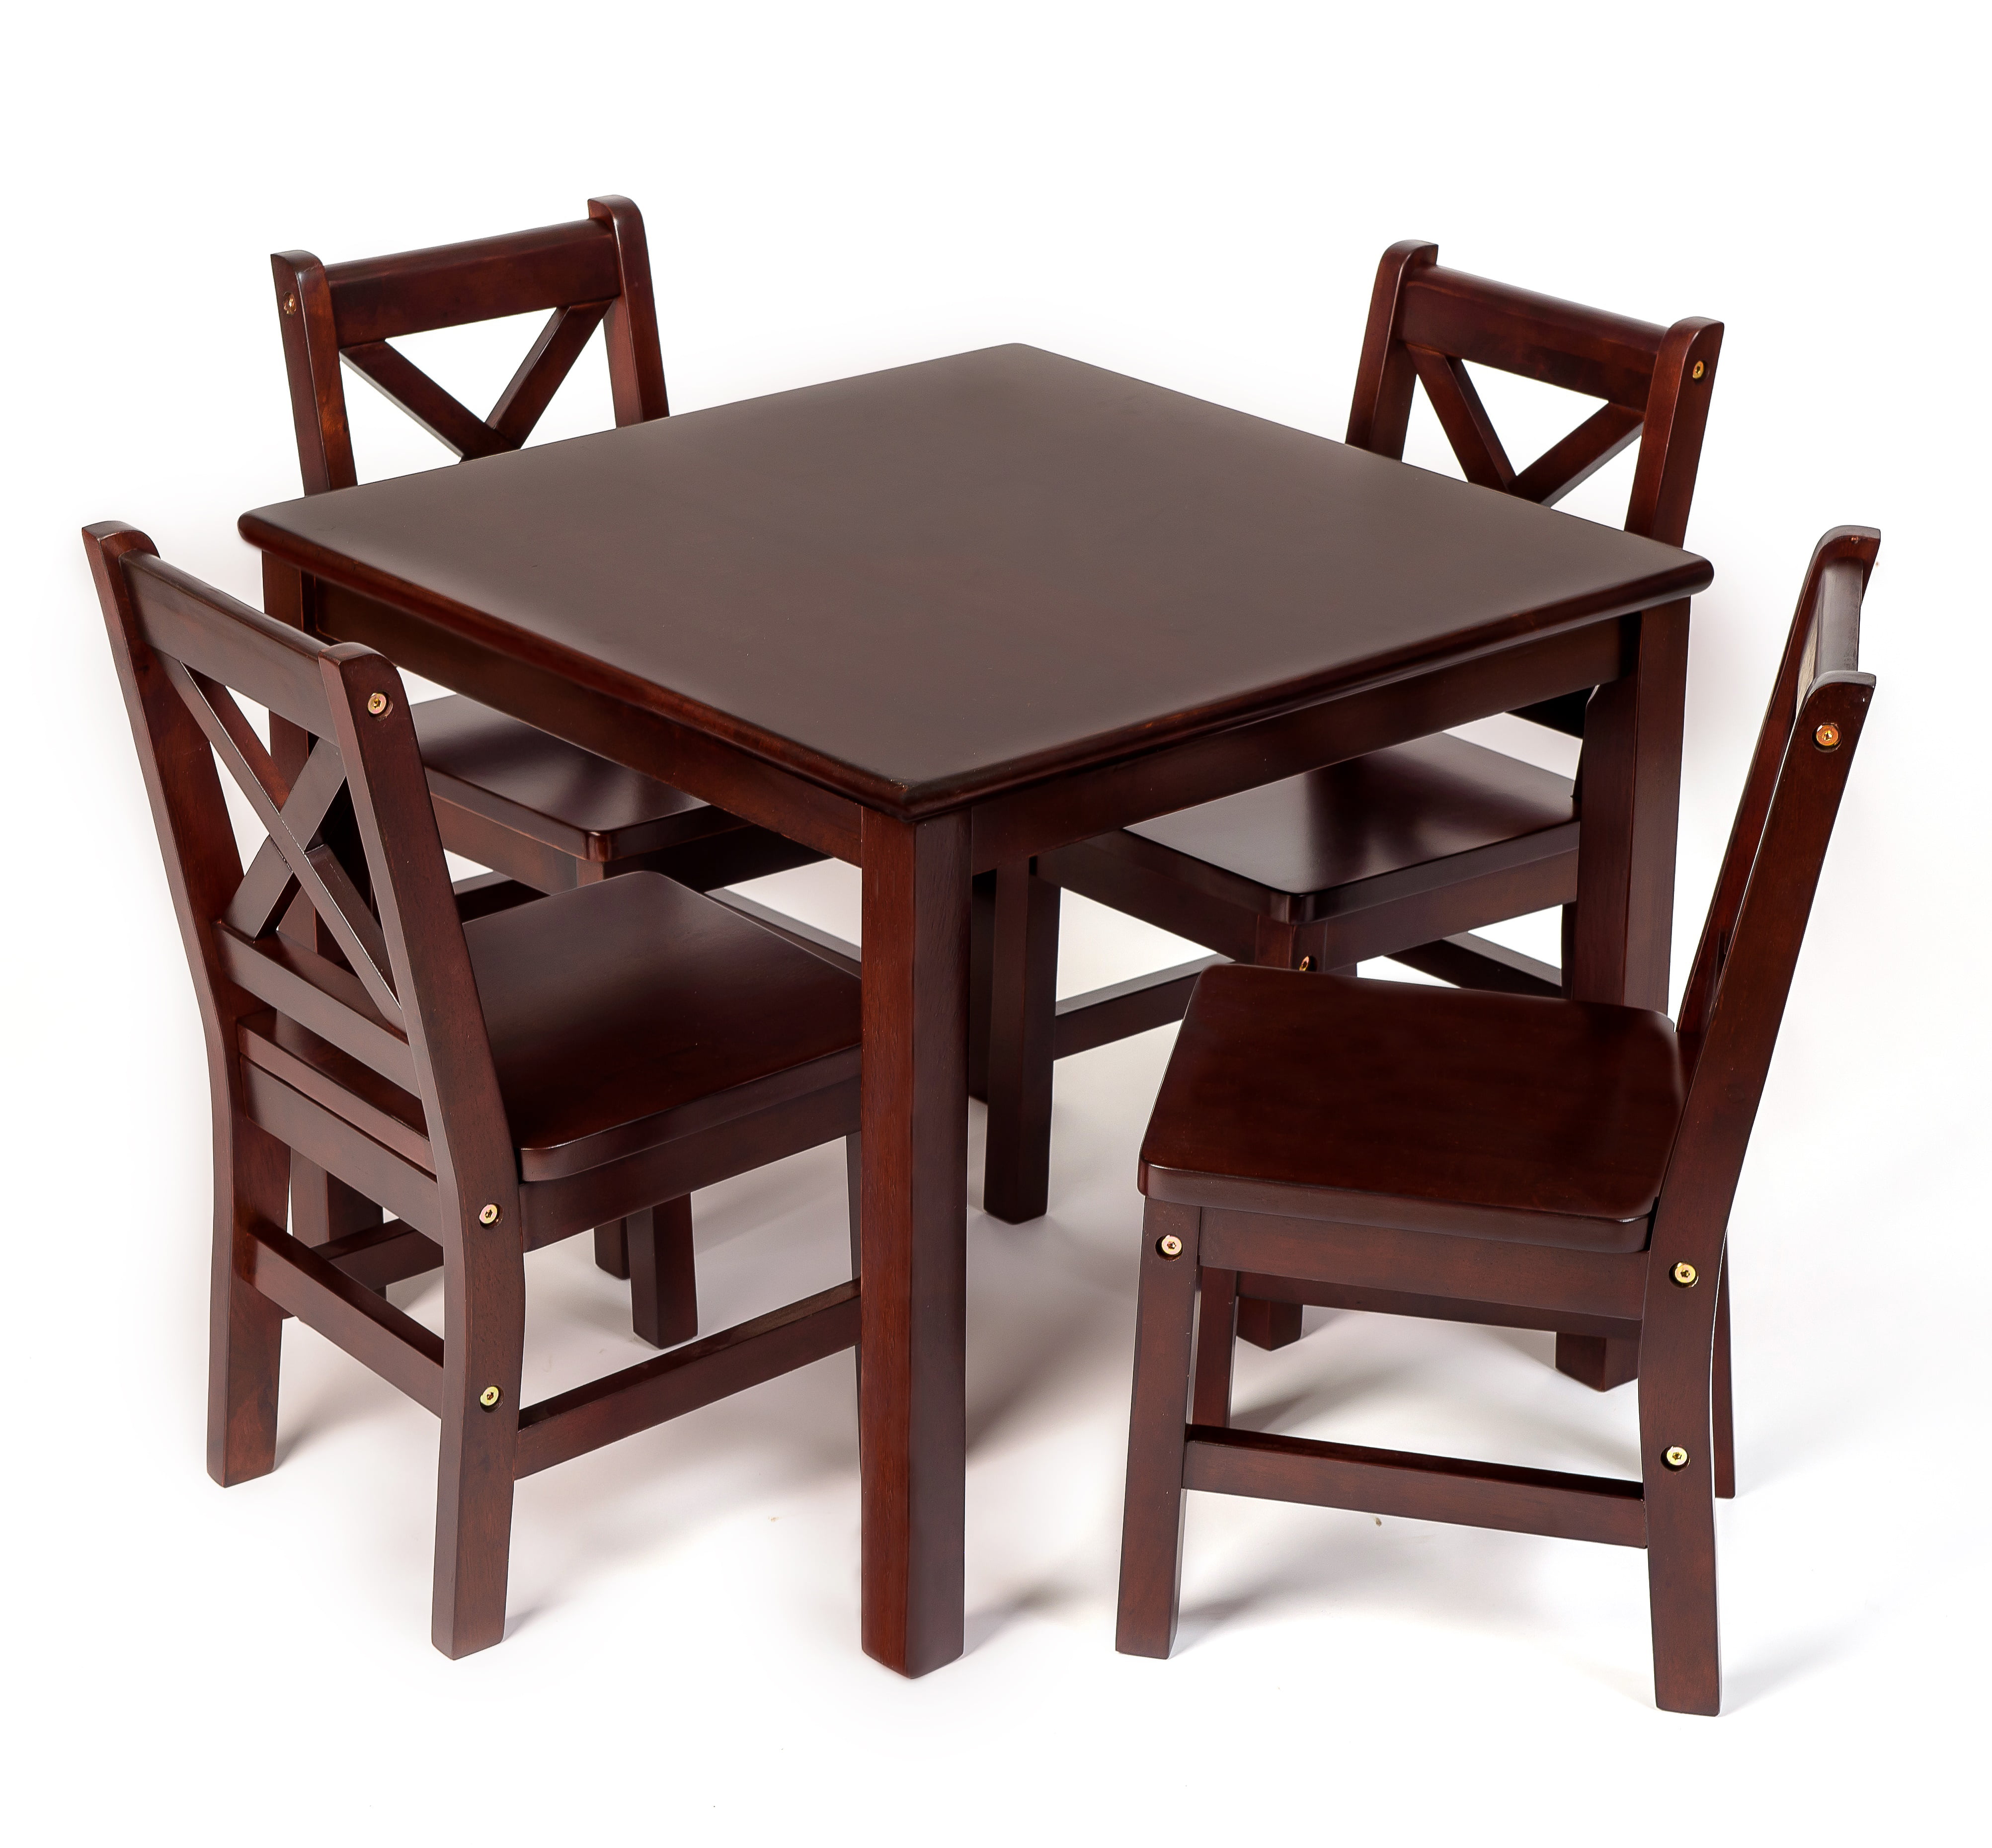 eHemco Kids Solid Hard Wood Table in Honey Oak without chair 